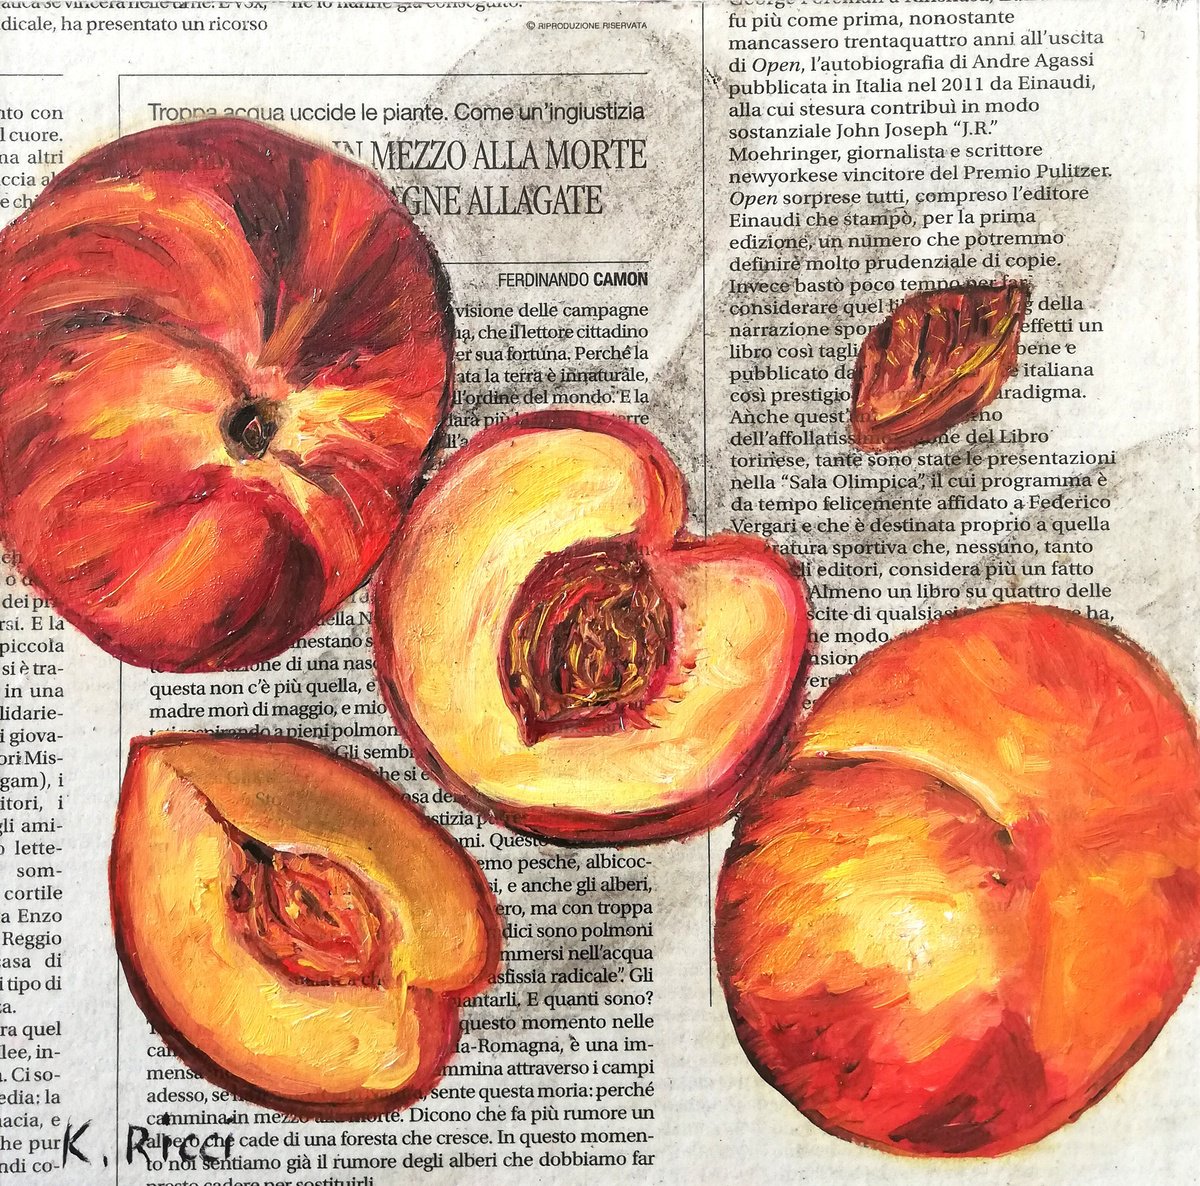 Peaches on Newspaper Original Oil on Wooden Board Painting 8 by 8(20x20cm) by Katia Ricci